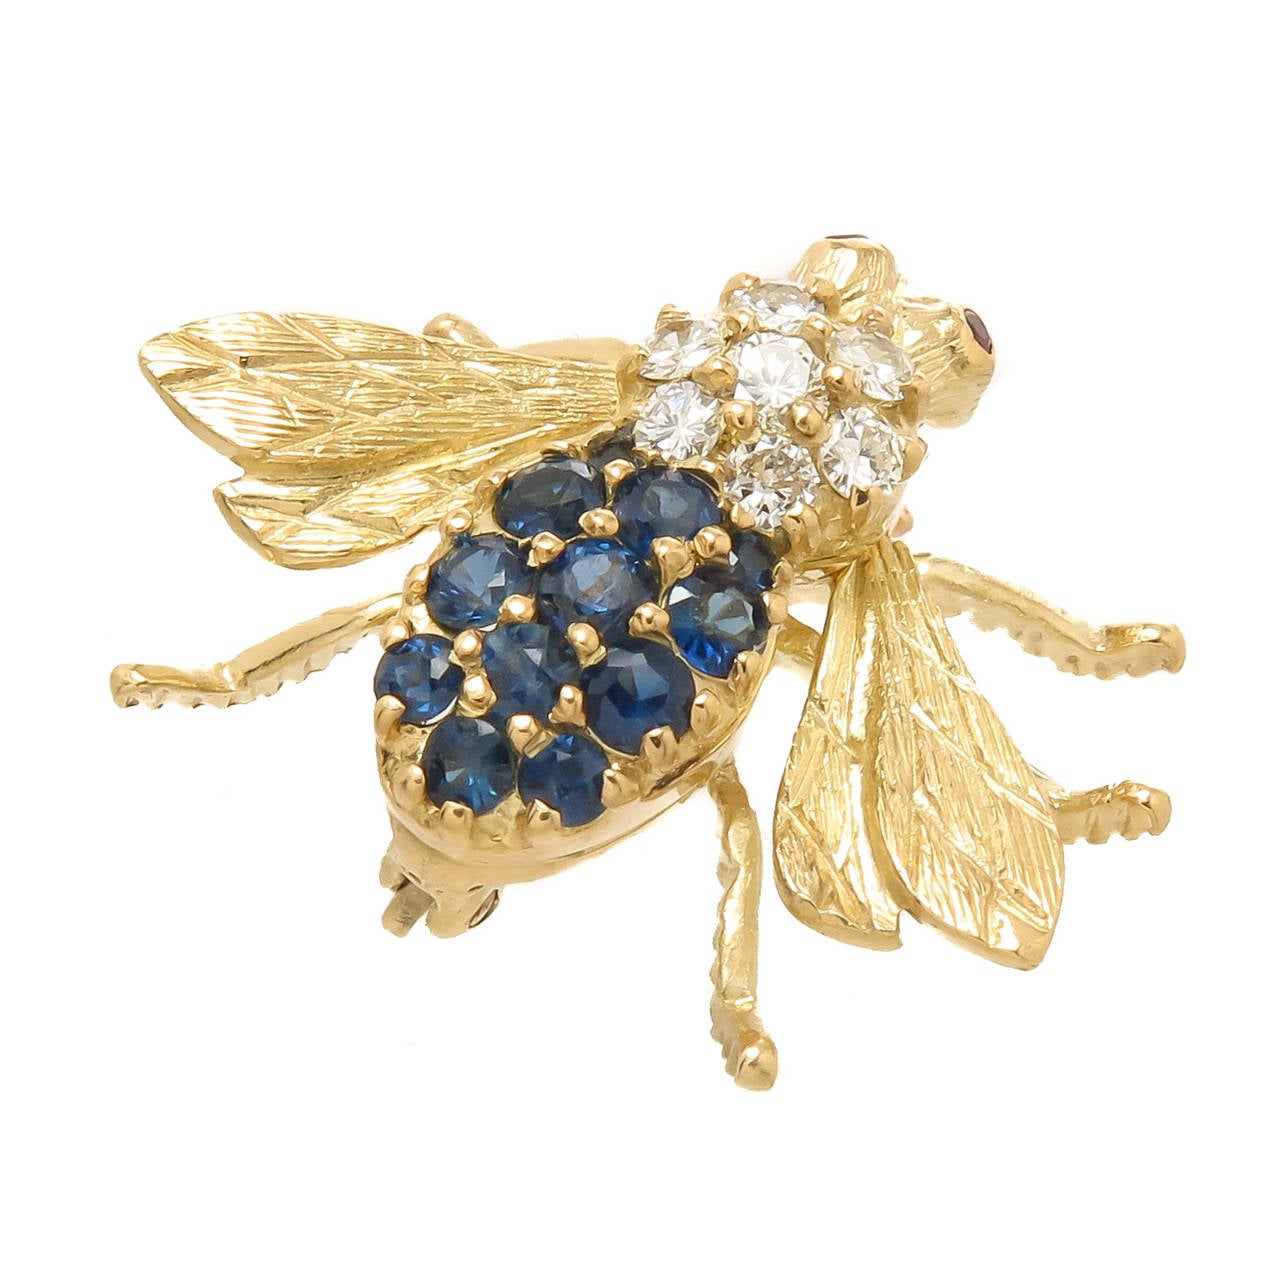 Circa 1980s 18K Yellow Gold, Diamond and Sapphire Bee Brooch by Herbert Rosenthal, measuring 7/8 inch in length and 1 inch from wing tip to tip. Set with Round Brilliant cut Diamonds totaling .25 Carat, further set with numerous Round Brilliant Fine